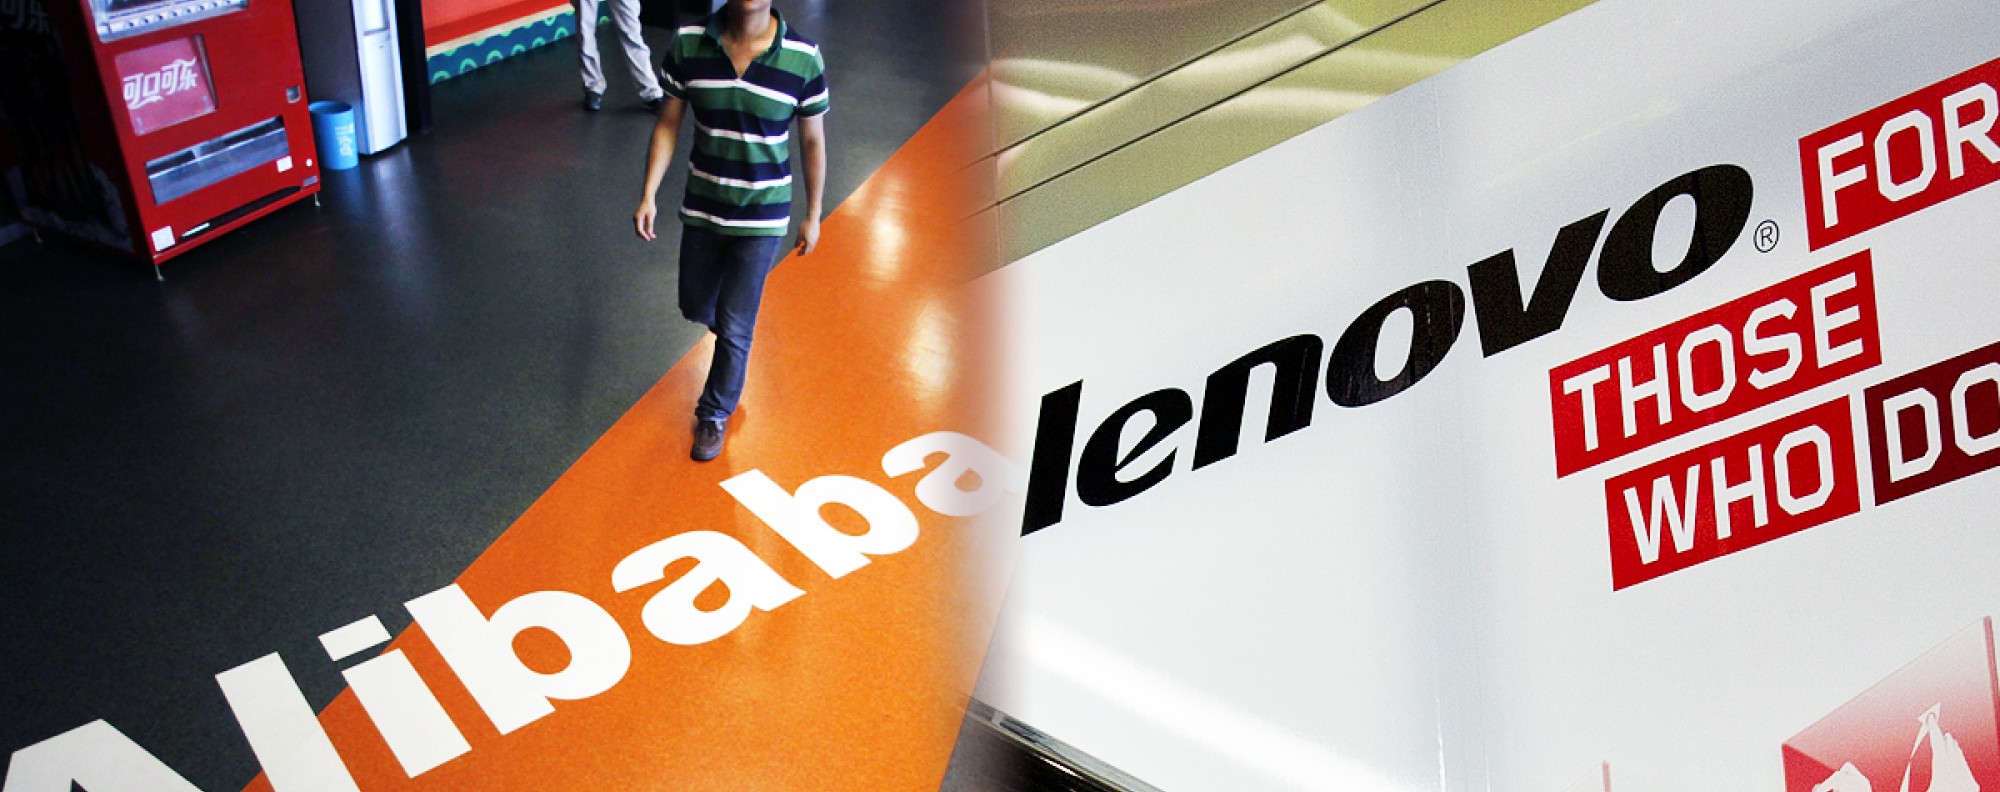 Analysis: Chinese tech giants Lenovo, Alibaba become hot targets of US class -action lawsuits | South China Morning Post